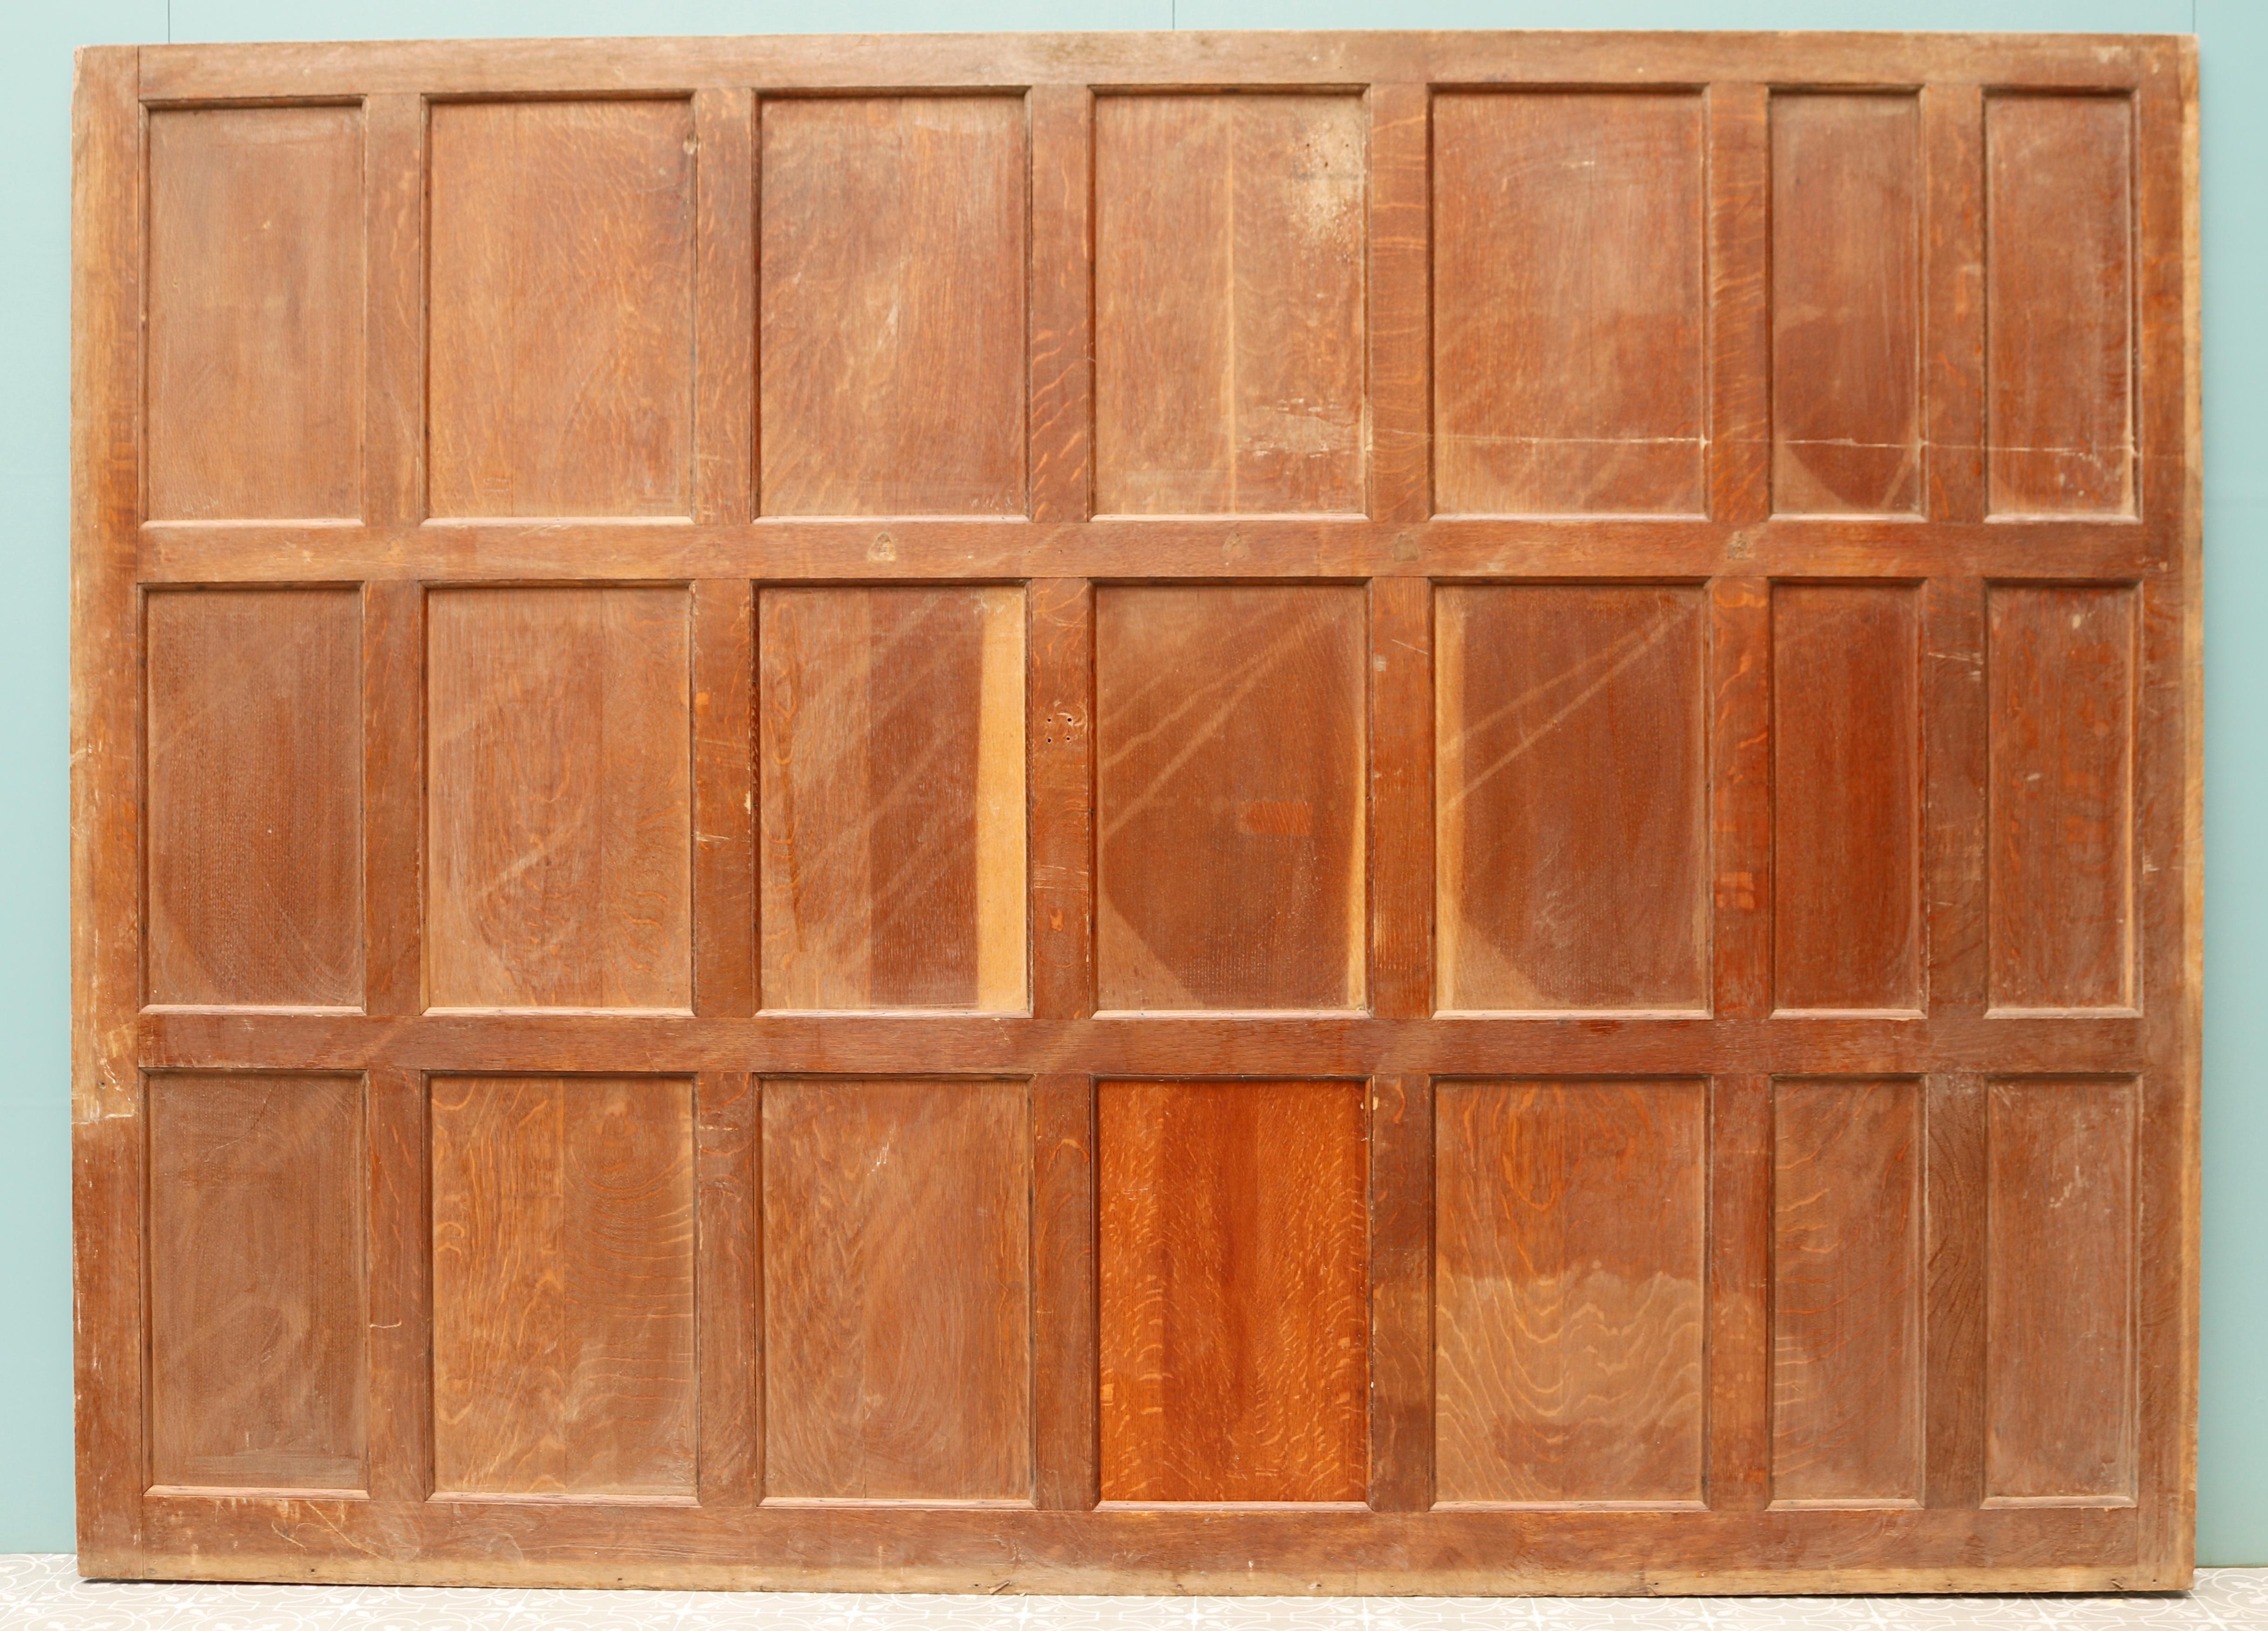 Reclaimed Victorian style oak wall panel. An antique wall panel.